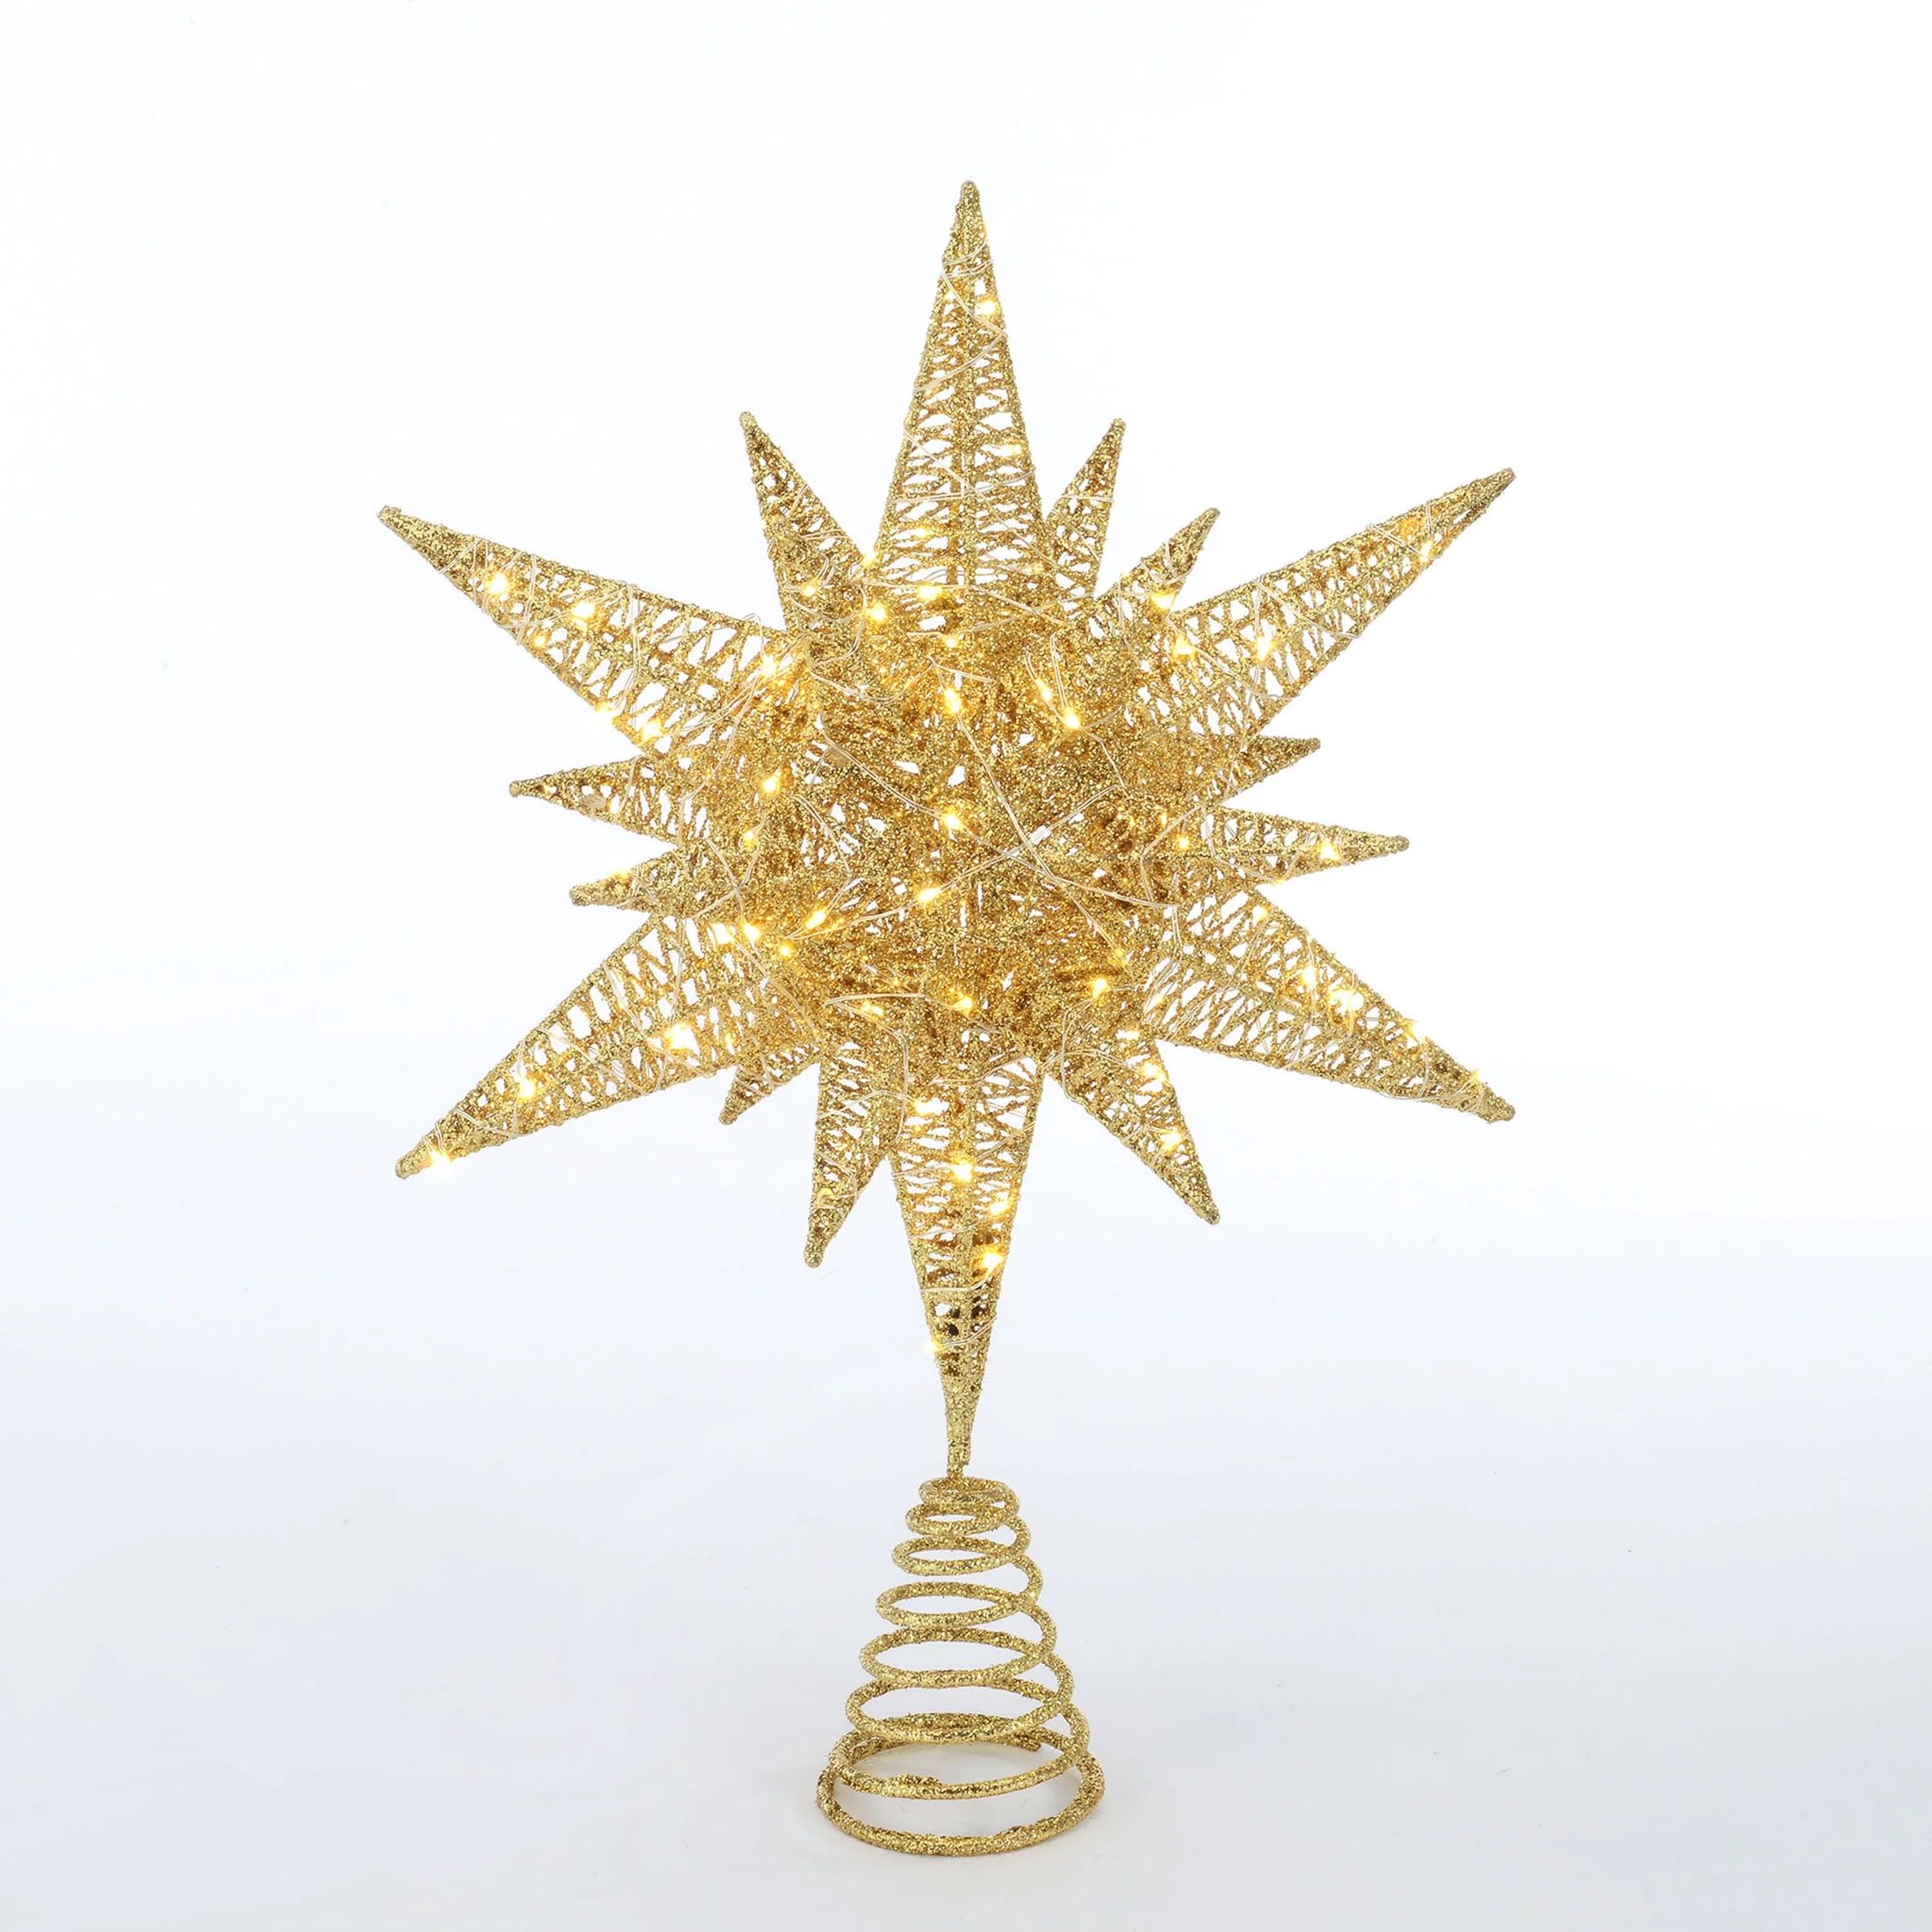 15.5" LED Christmas Tree Topper, Champagne Gold Star, Holiday Time | Walmart (US)